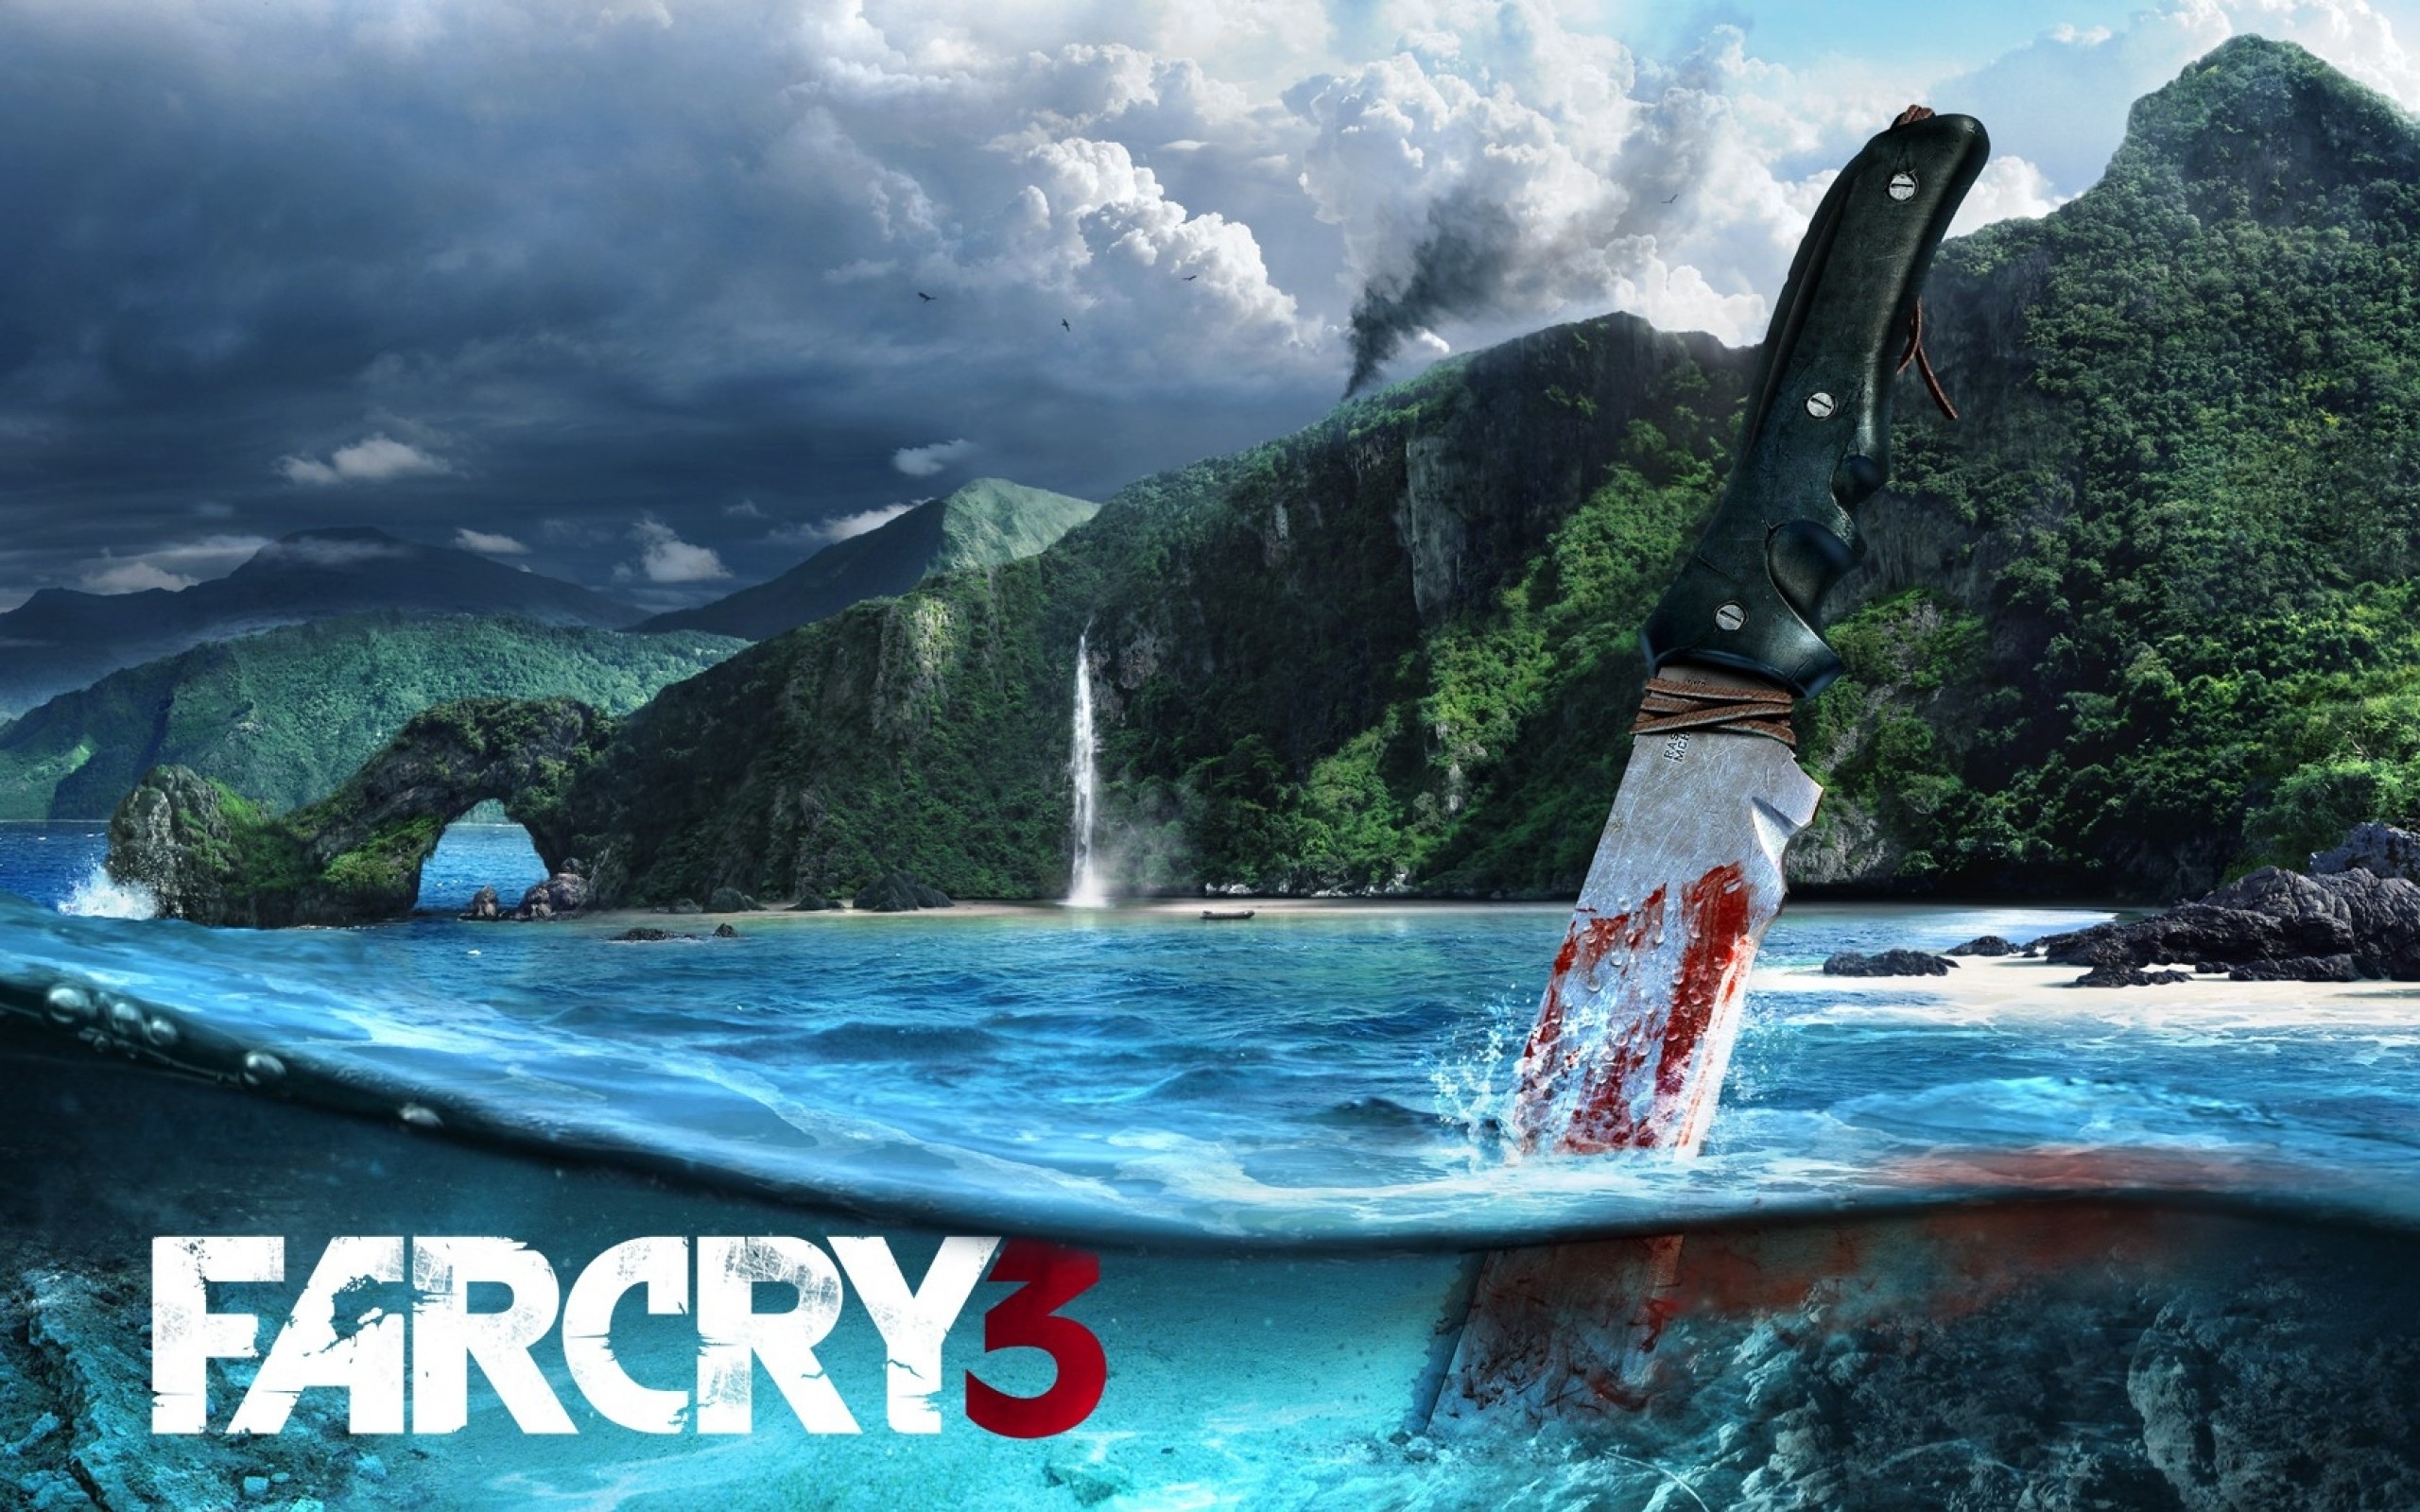 General 2560x1600 Far Cry 3 nature sea knife video games island tropical PC gaming video game art 2012 (Year) Ubisoft digital art